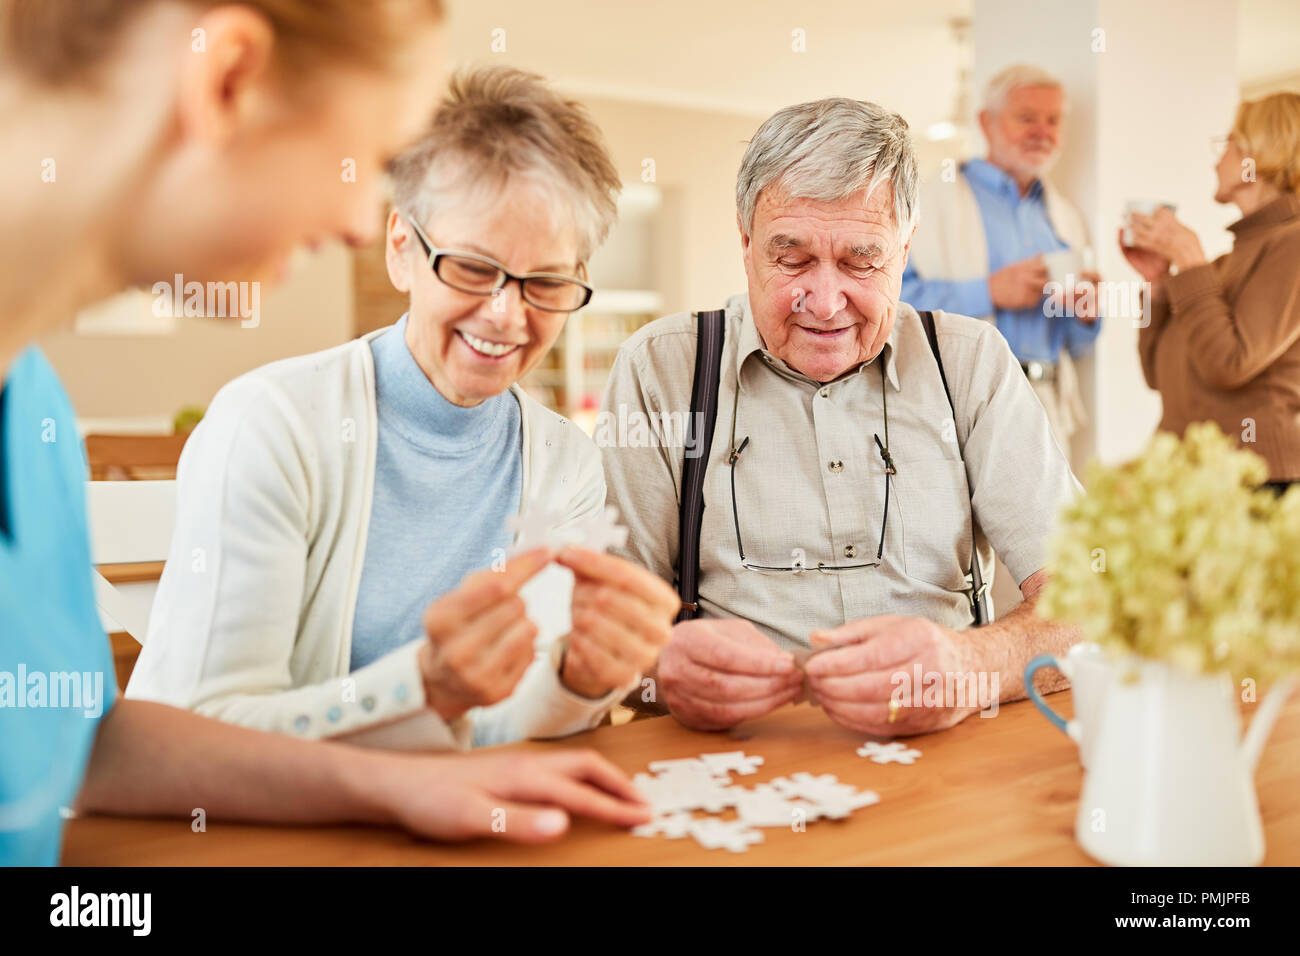 Seniors with Alzheimer's disease or dementia playing puzzle with senior care Stock Photo